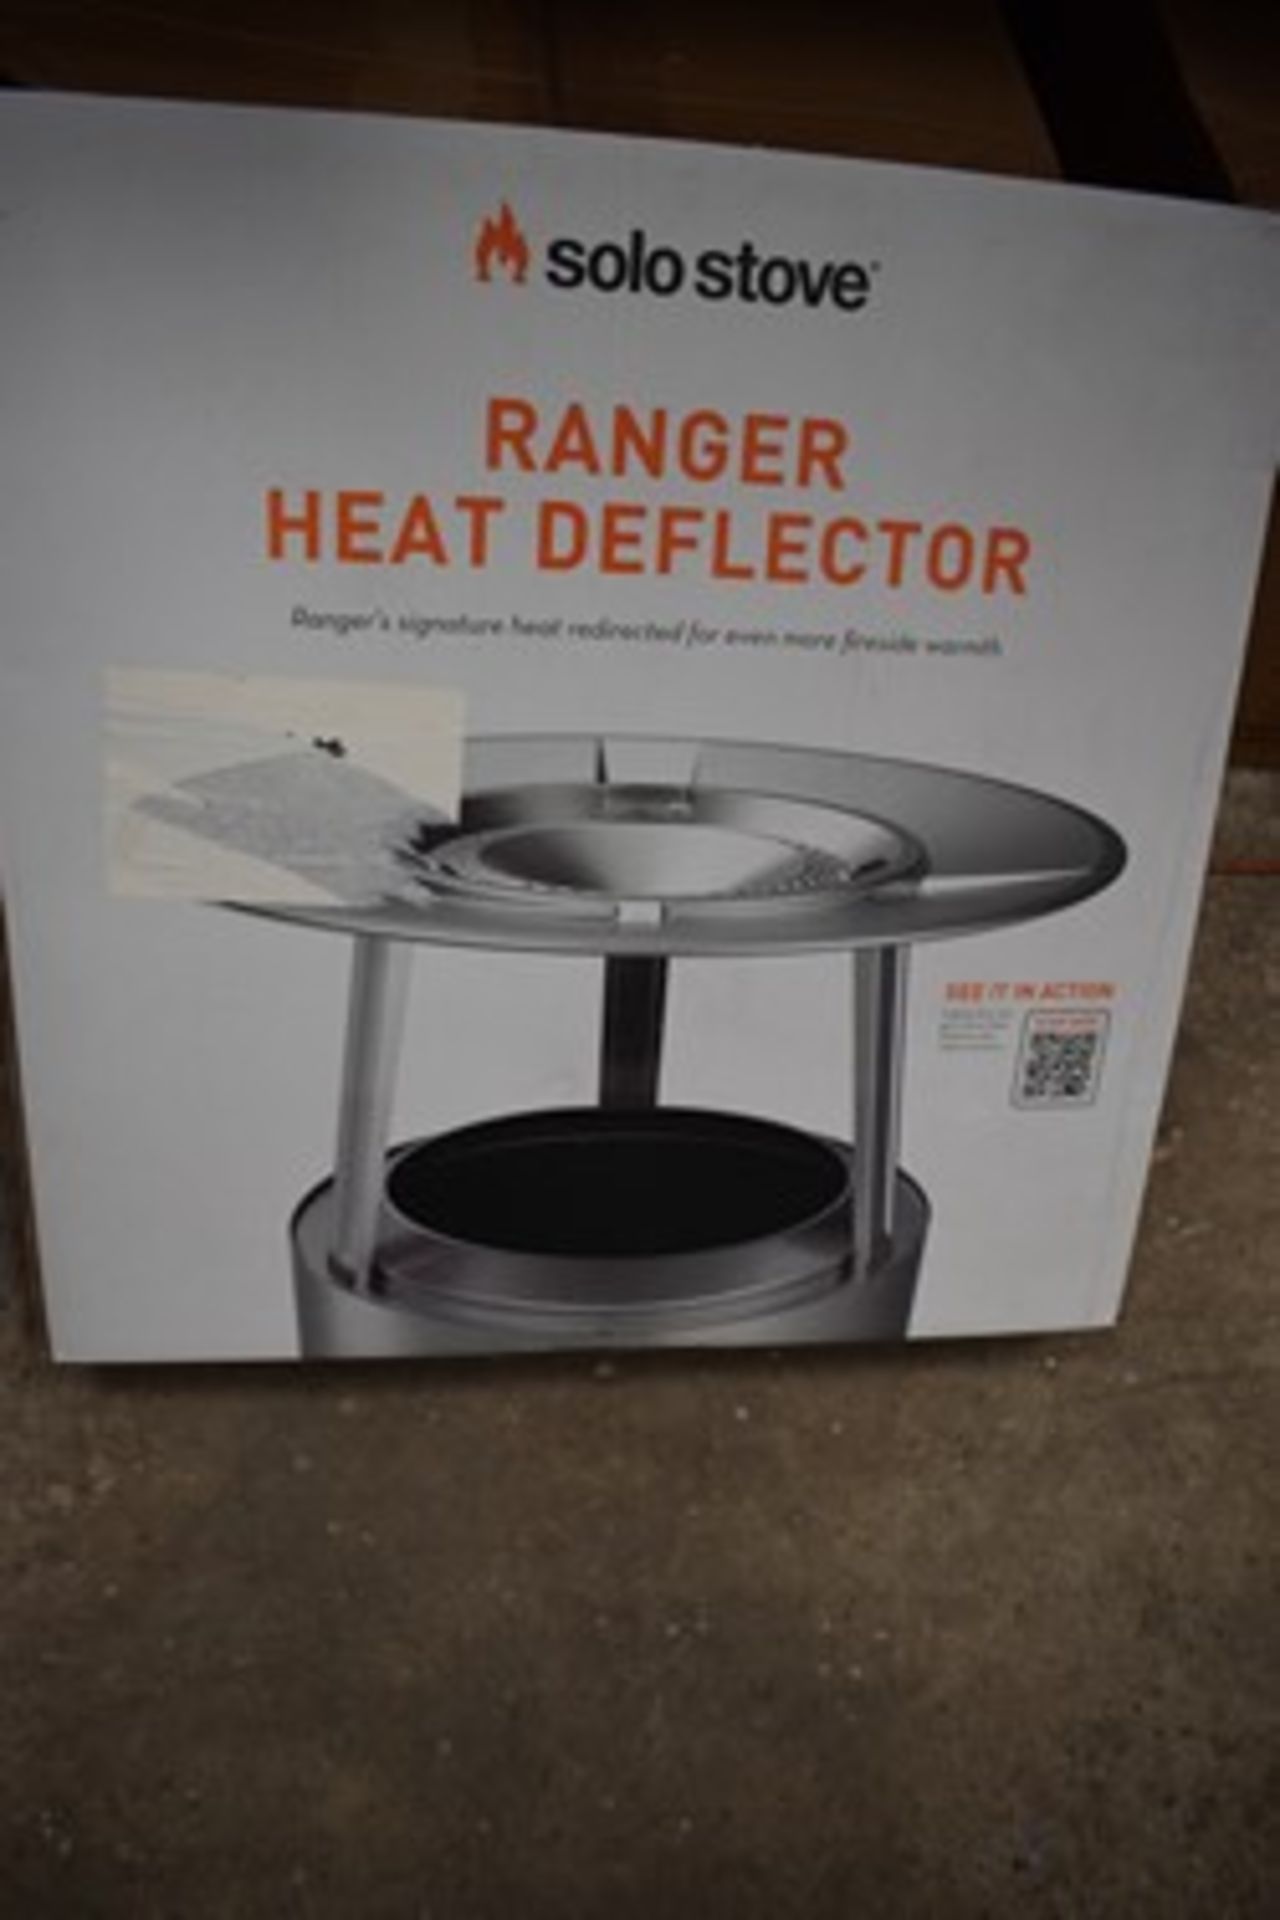 1x Solo Stove Ranger heat deflector, EAN: 850032307505 - sealed new in box (ES14)